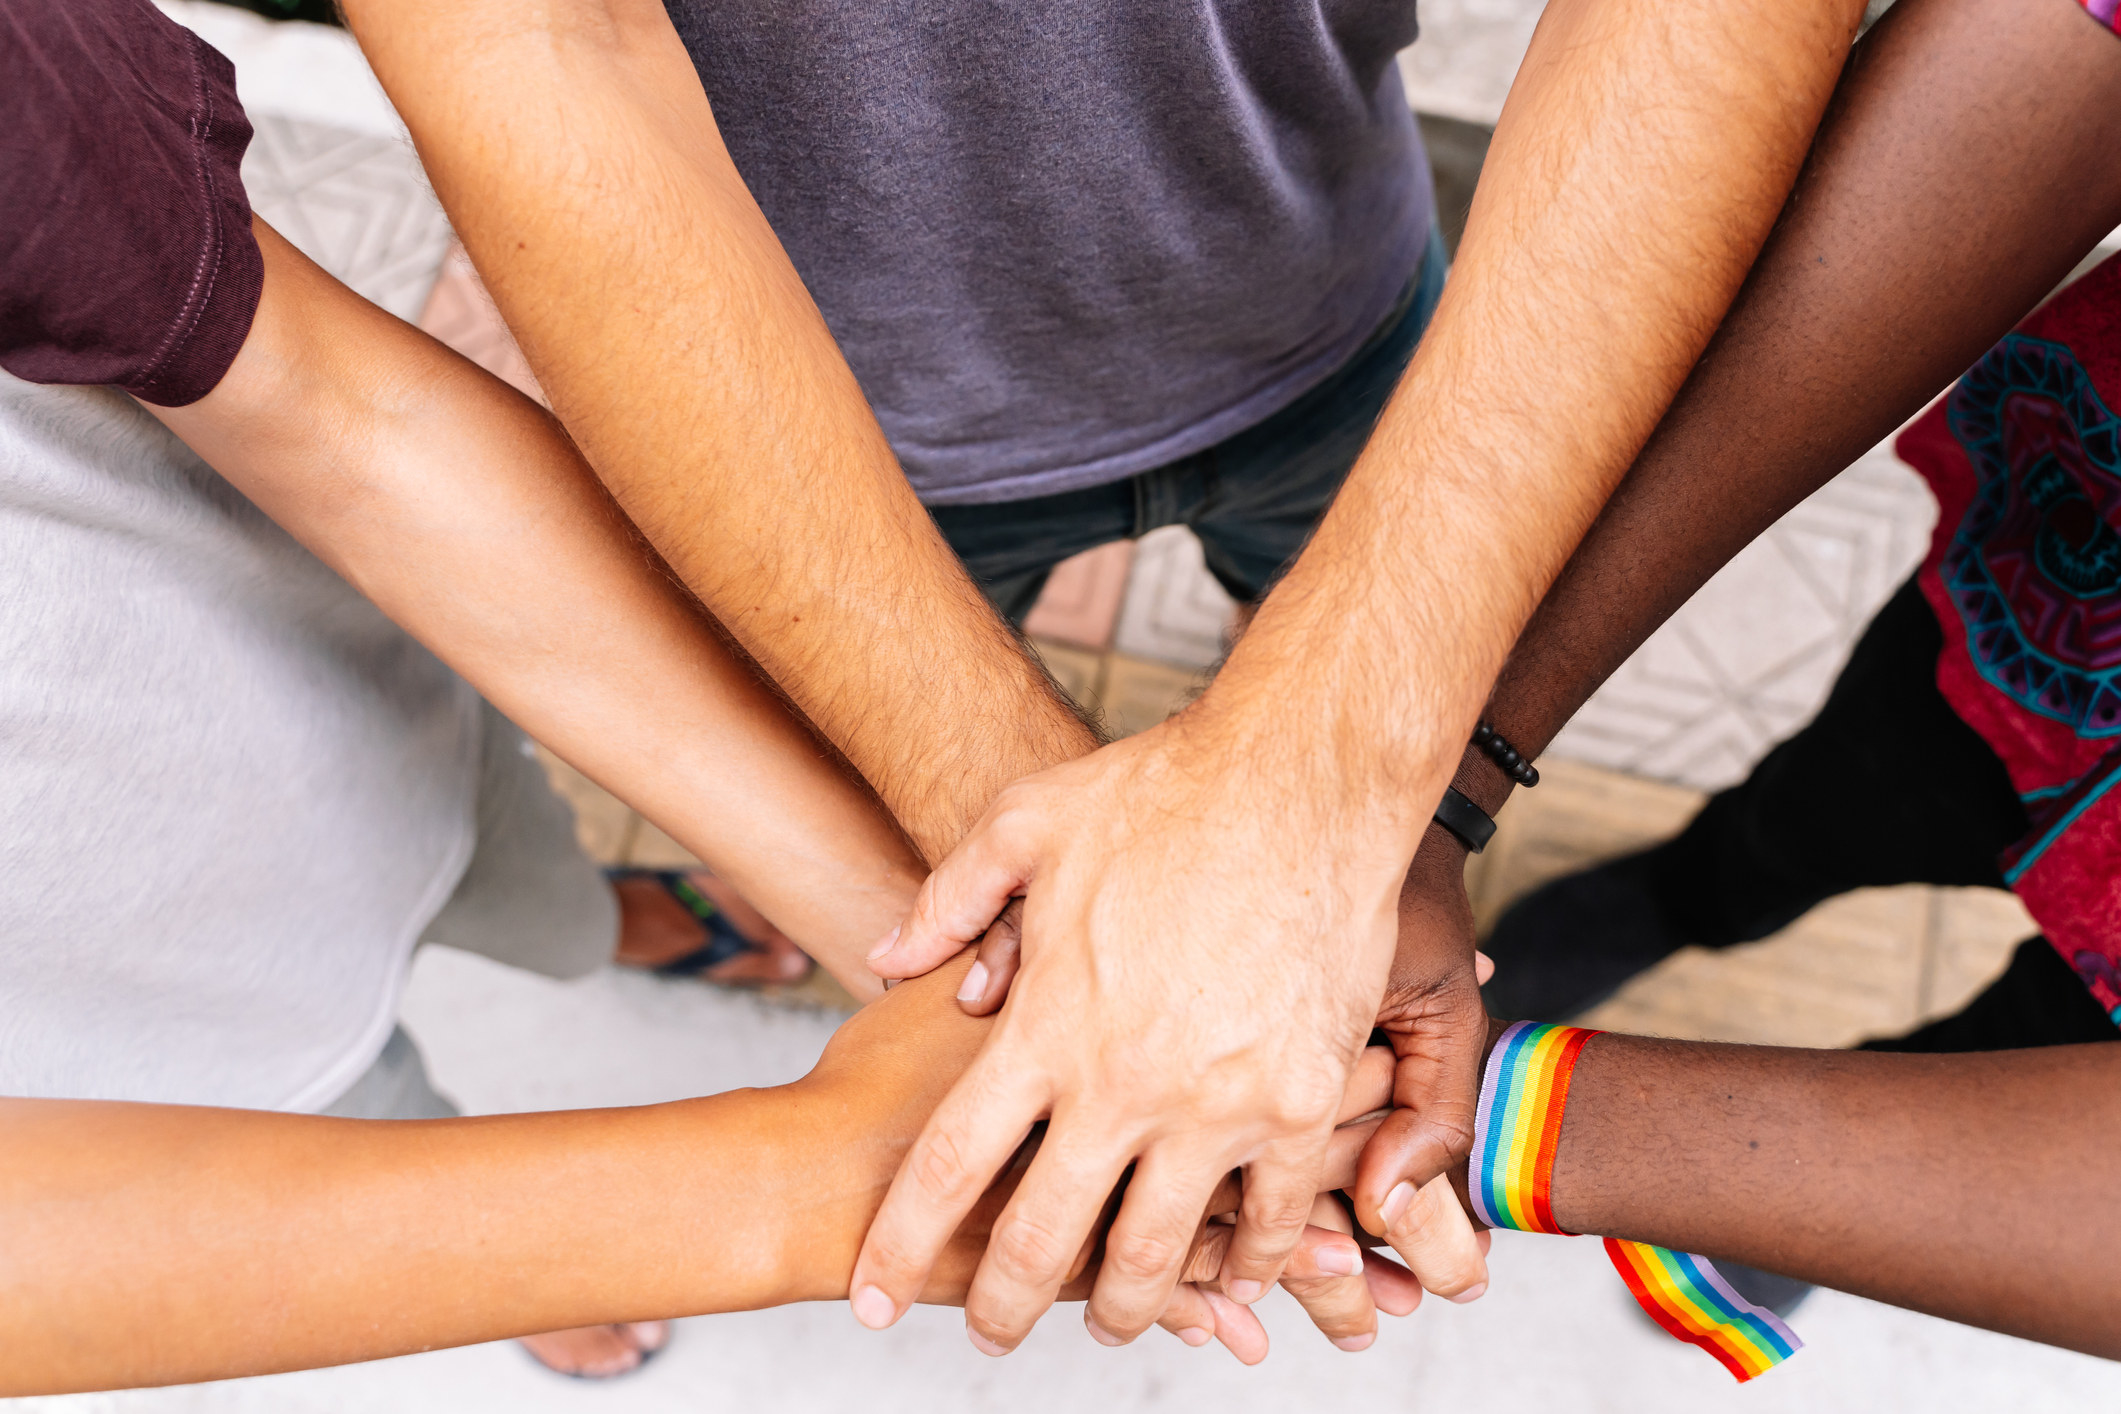 Hands of a group of people of different ethnicities with an LGBT flag bracelet